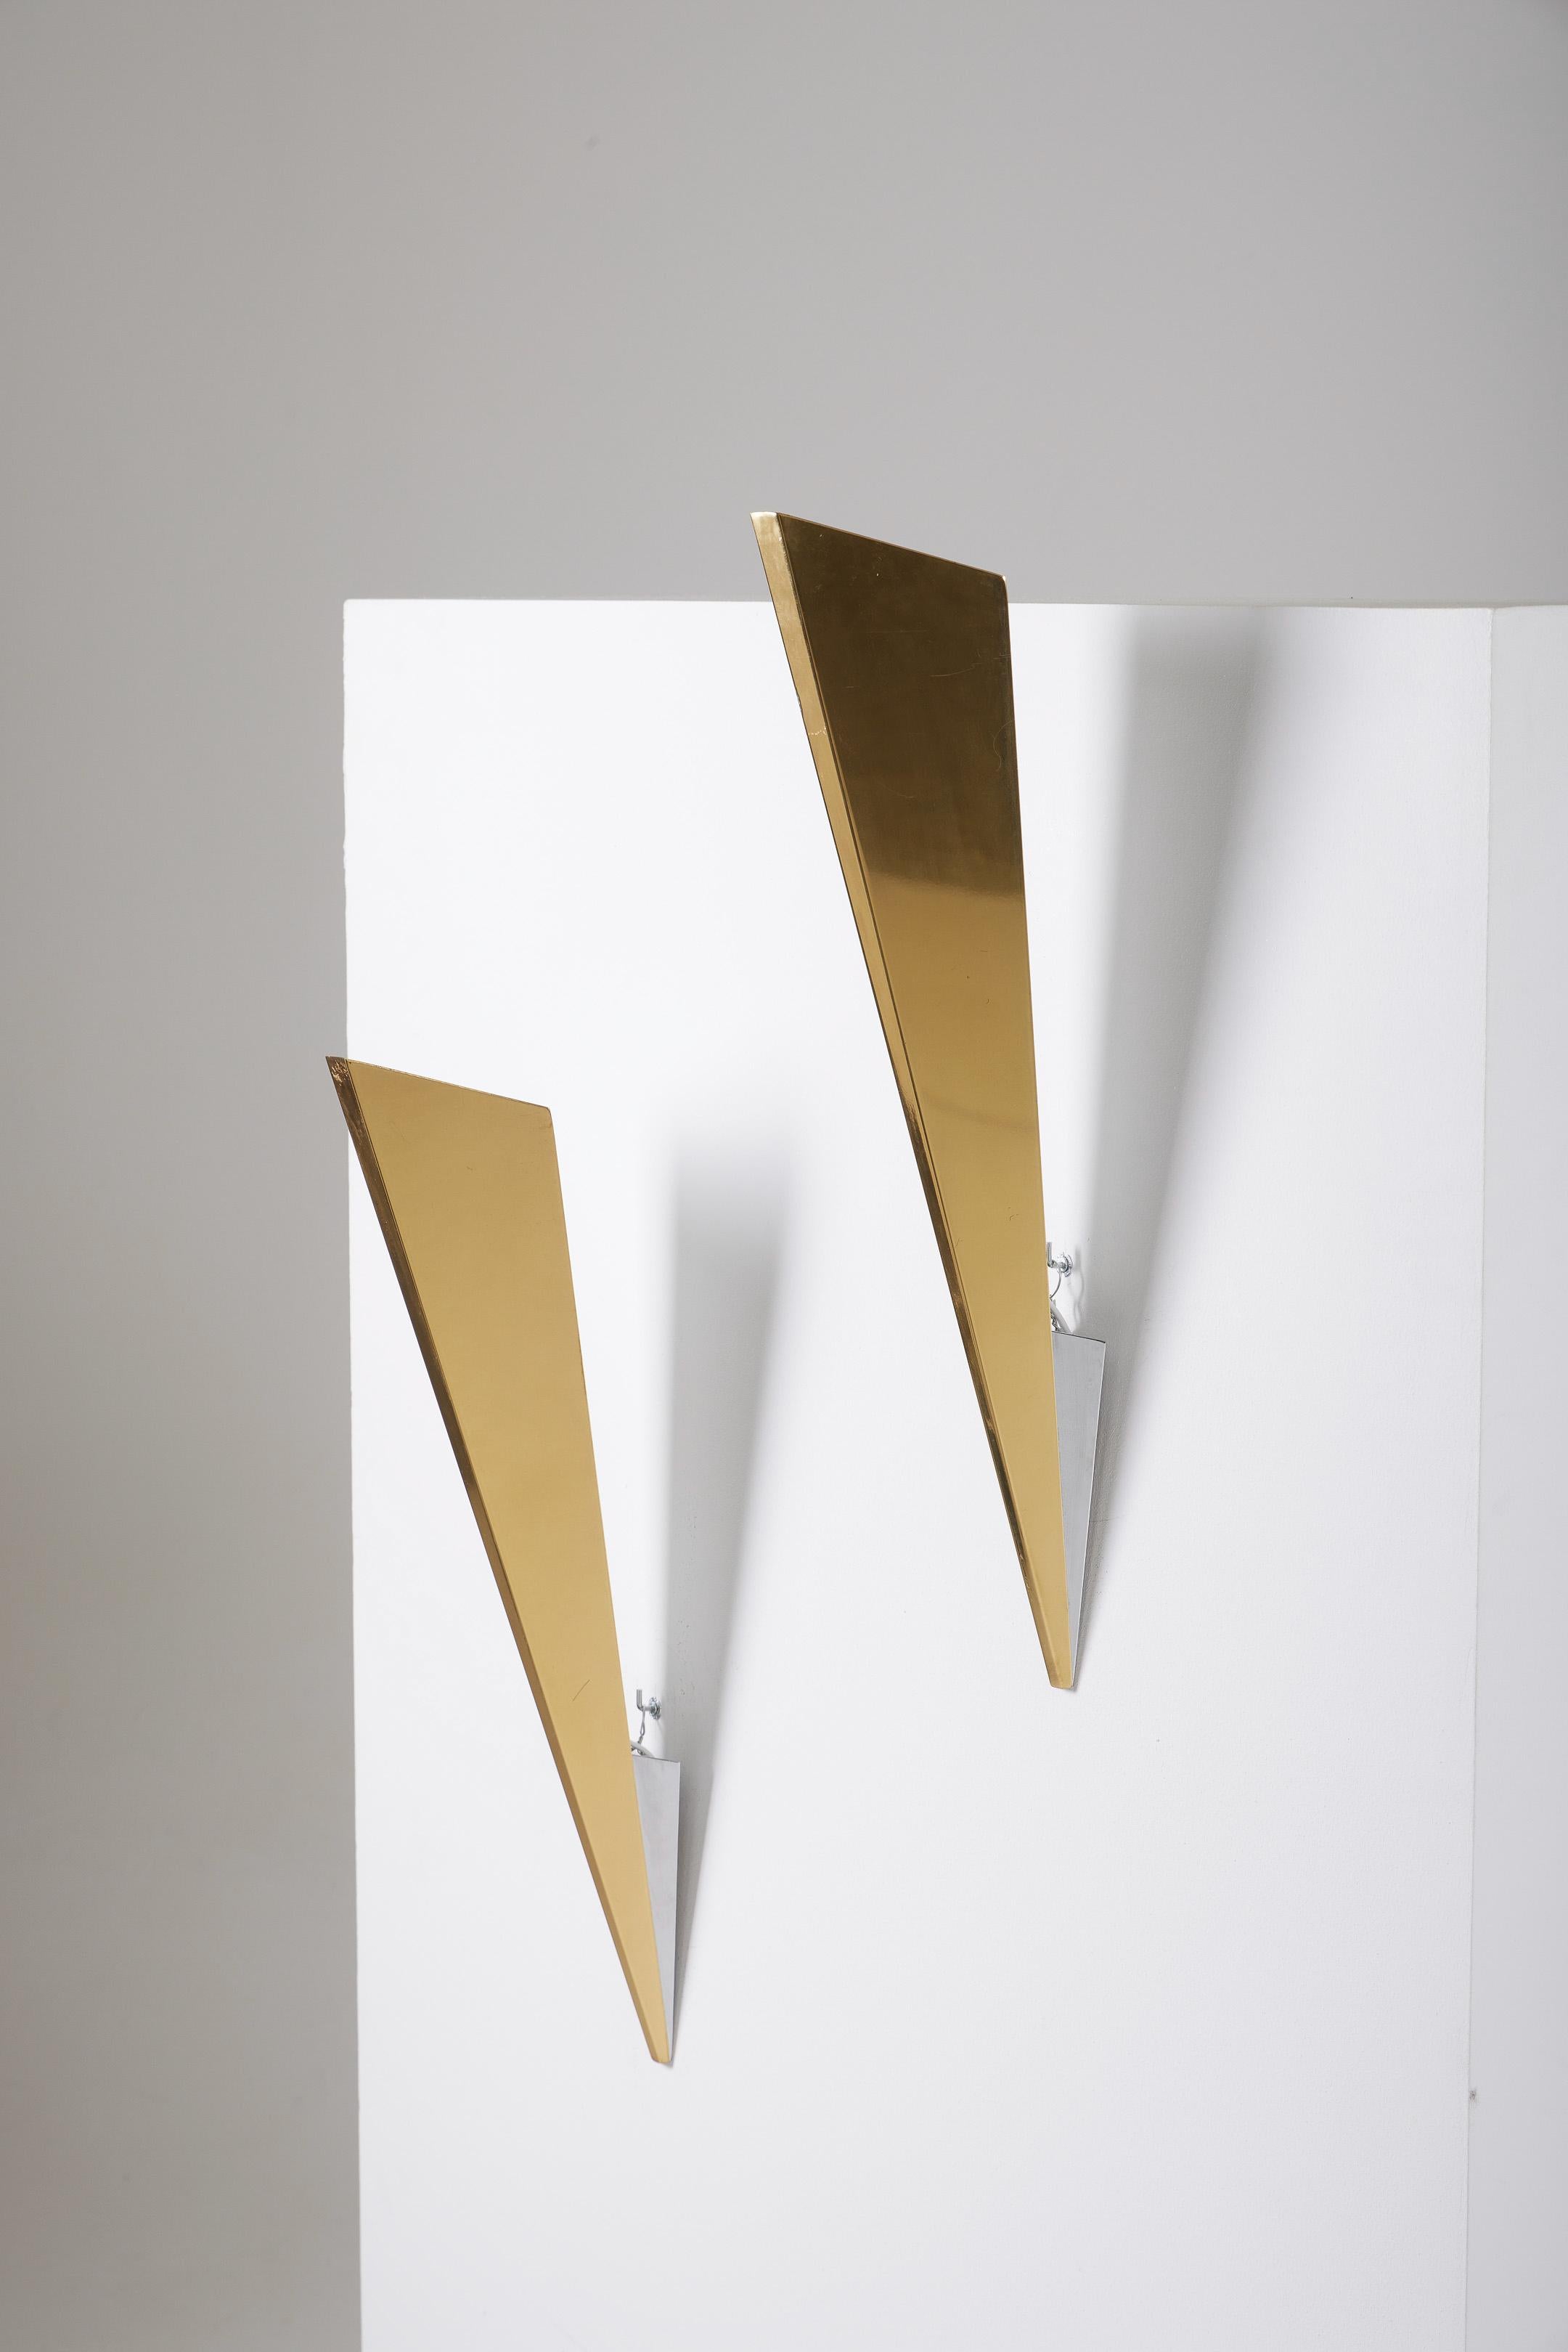 Large pair of postmodern wall sconces in chrome and brass, dating back to the 1980s. Overall good condition.
LP1999